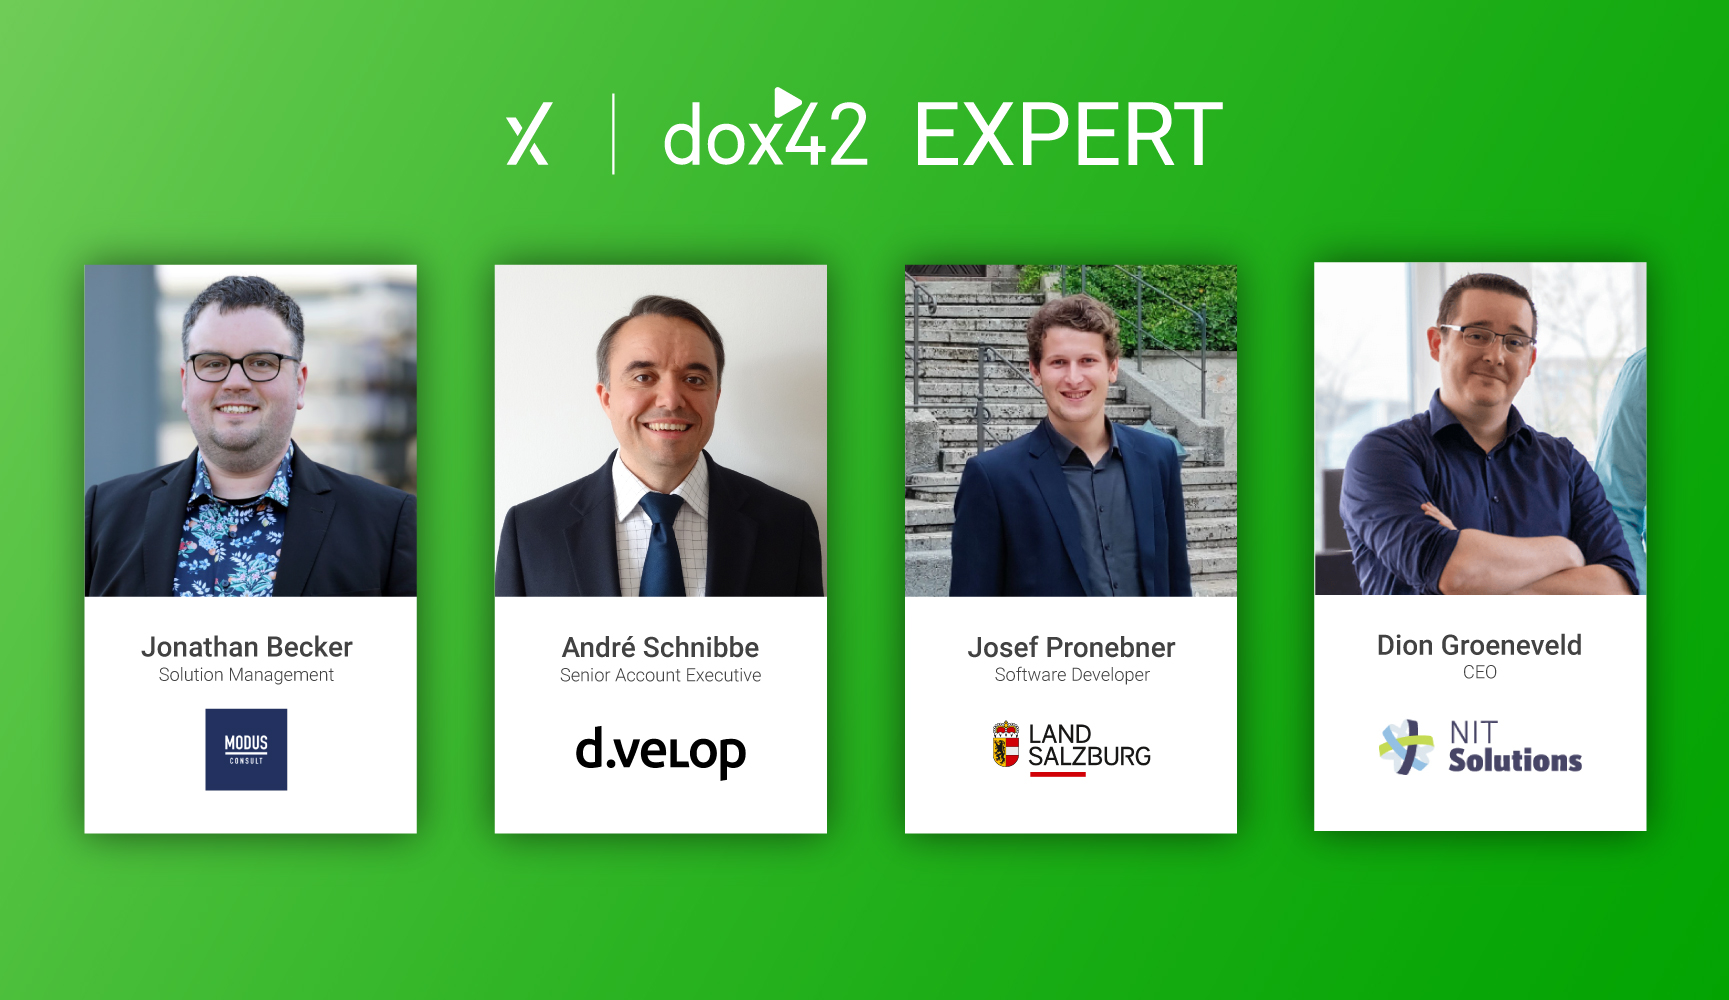 Welcome to our new dox42 Experts